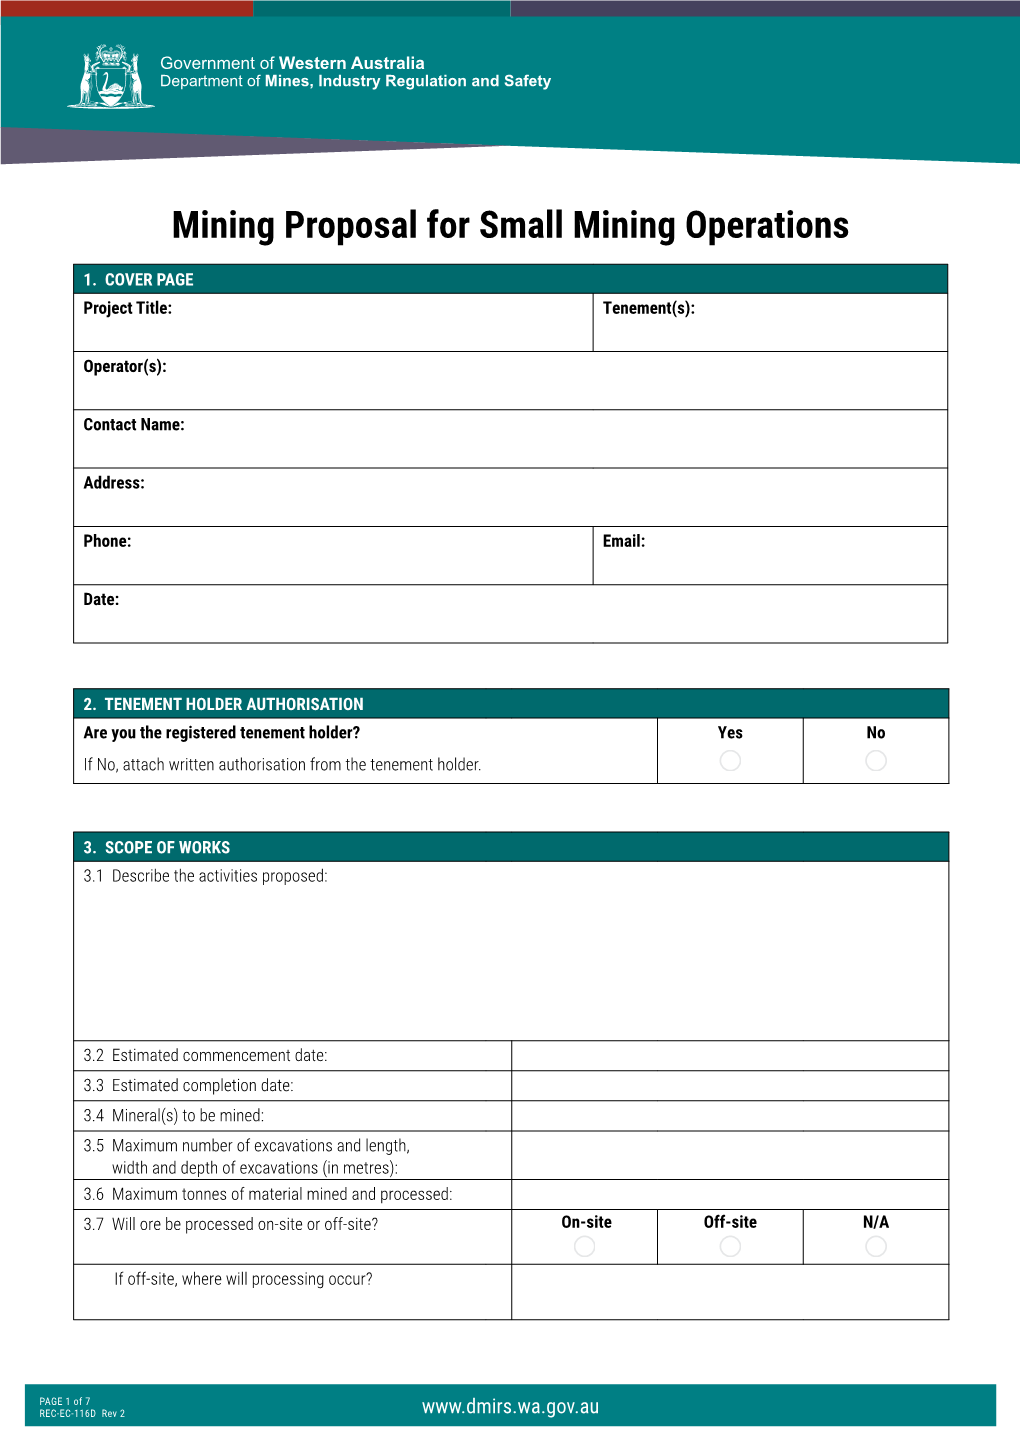 Mining Proposal for Small Mining Operations